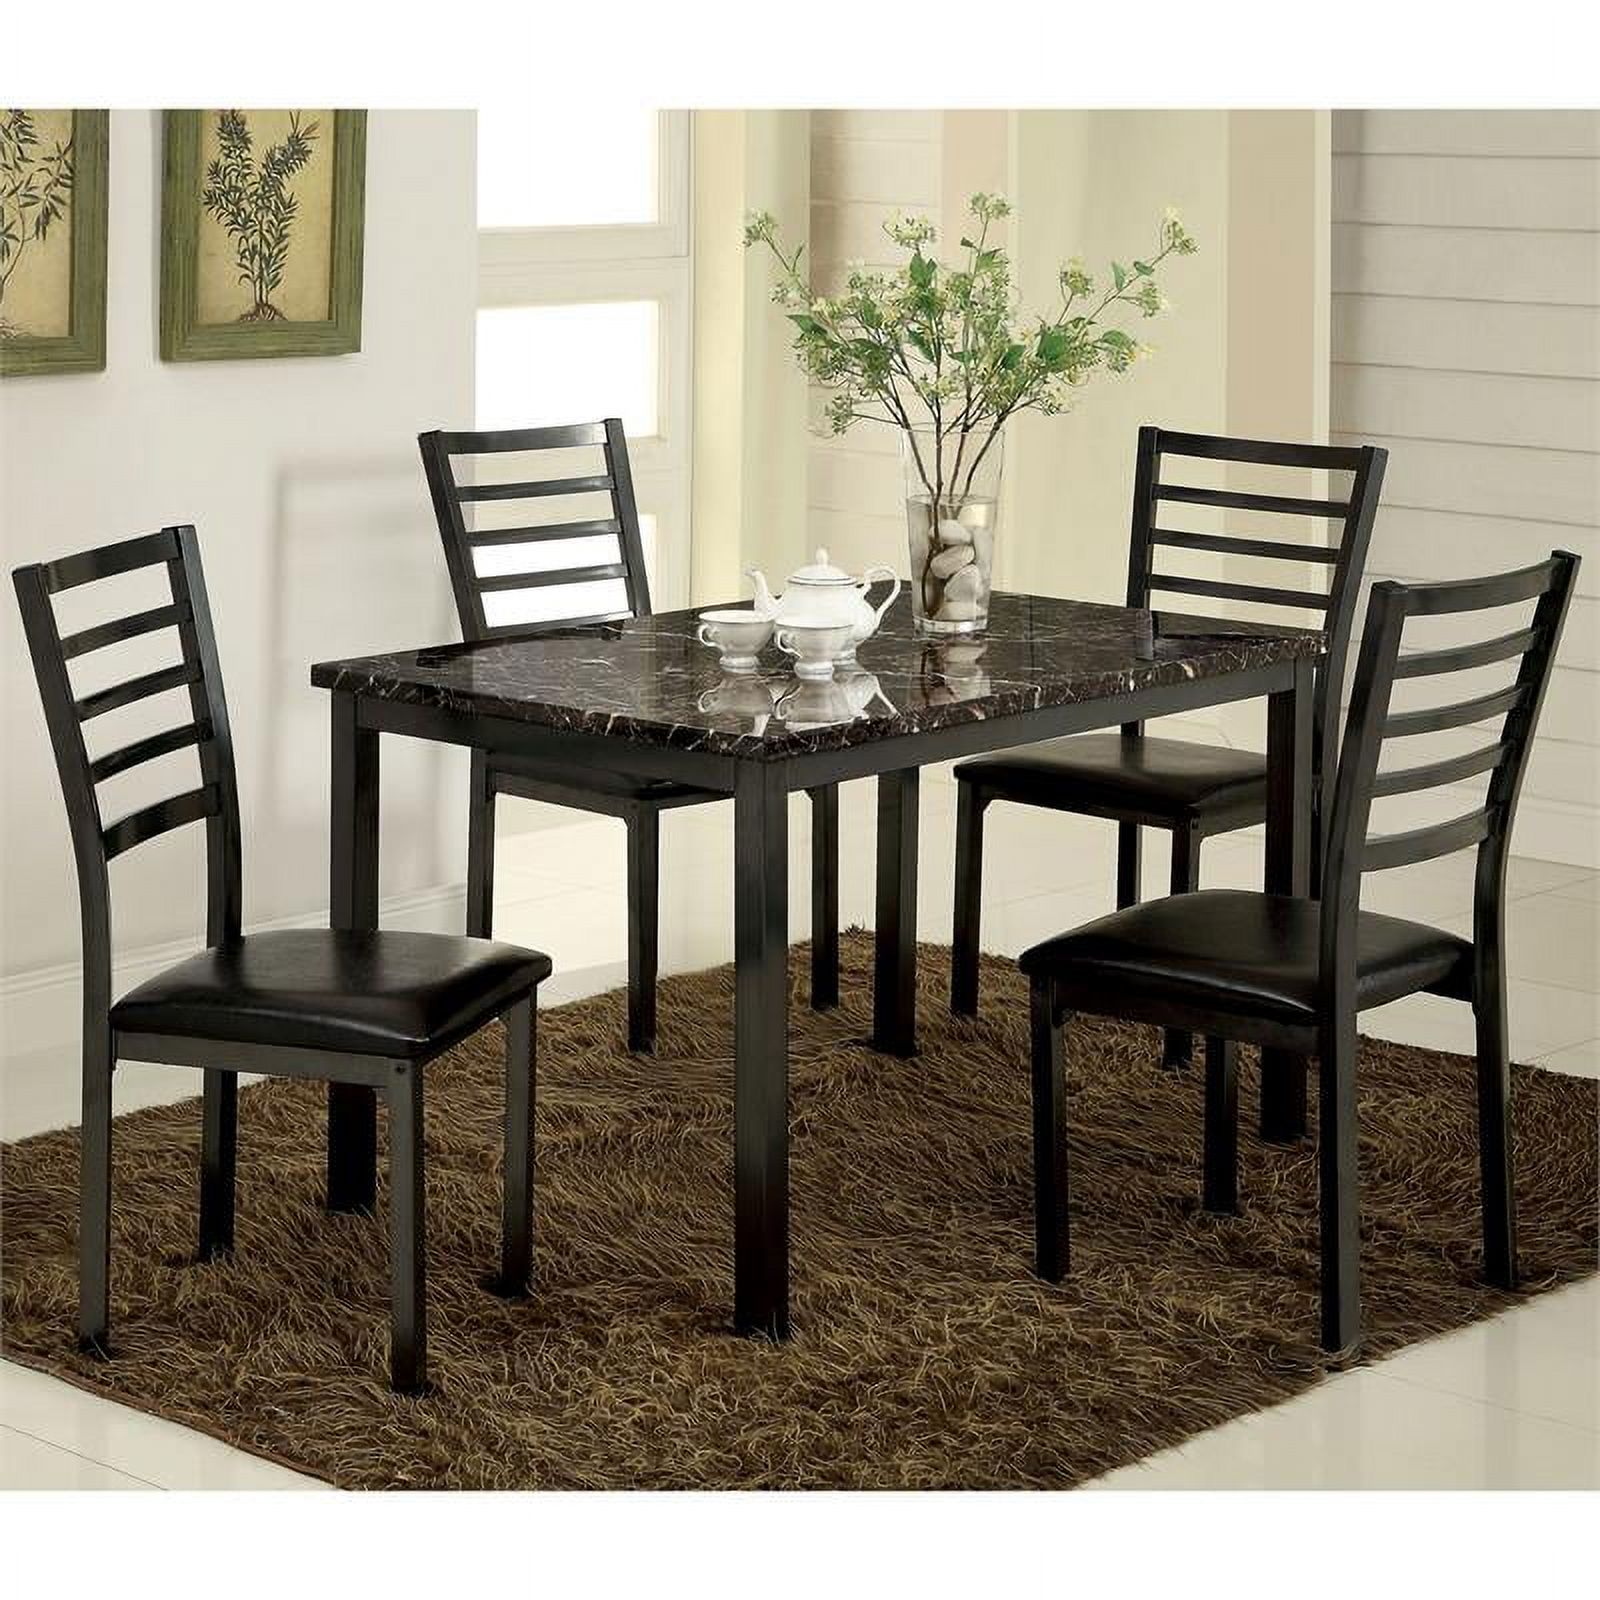 Furniture of America Maxson Transitional Metal 48-Inch Dining Table in Black - image 7 of 10